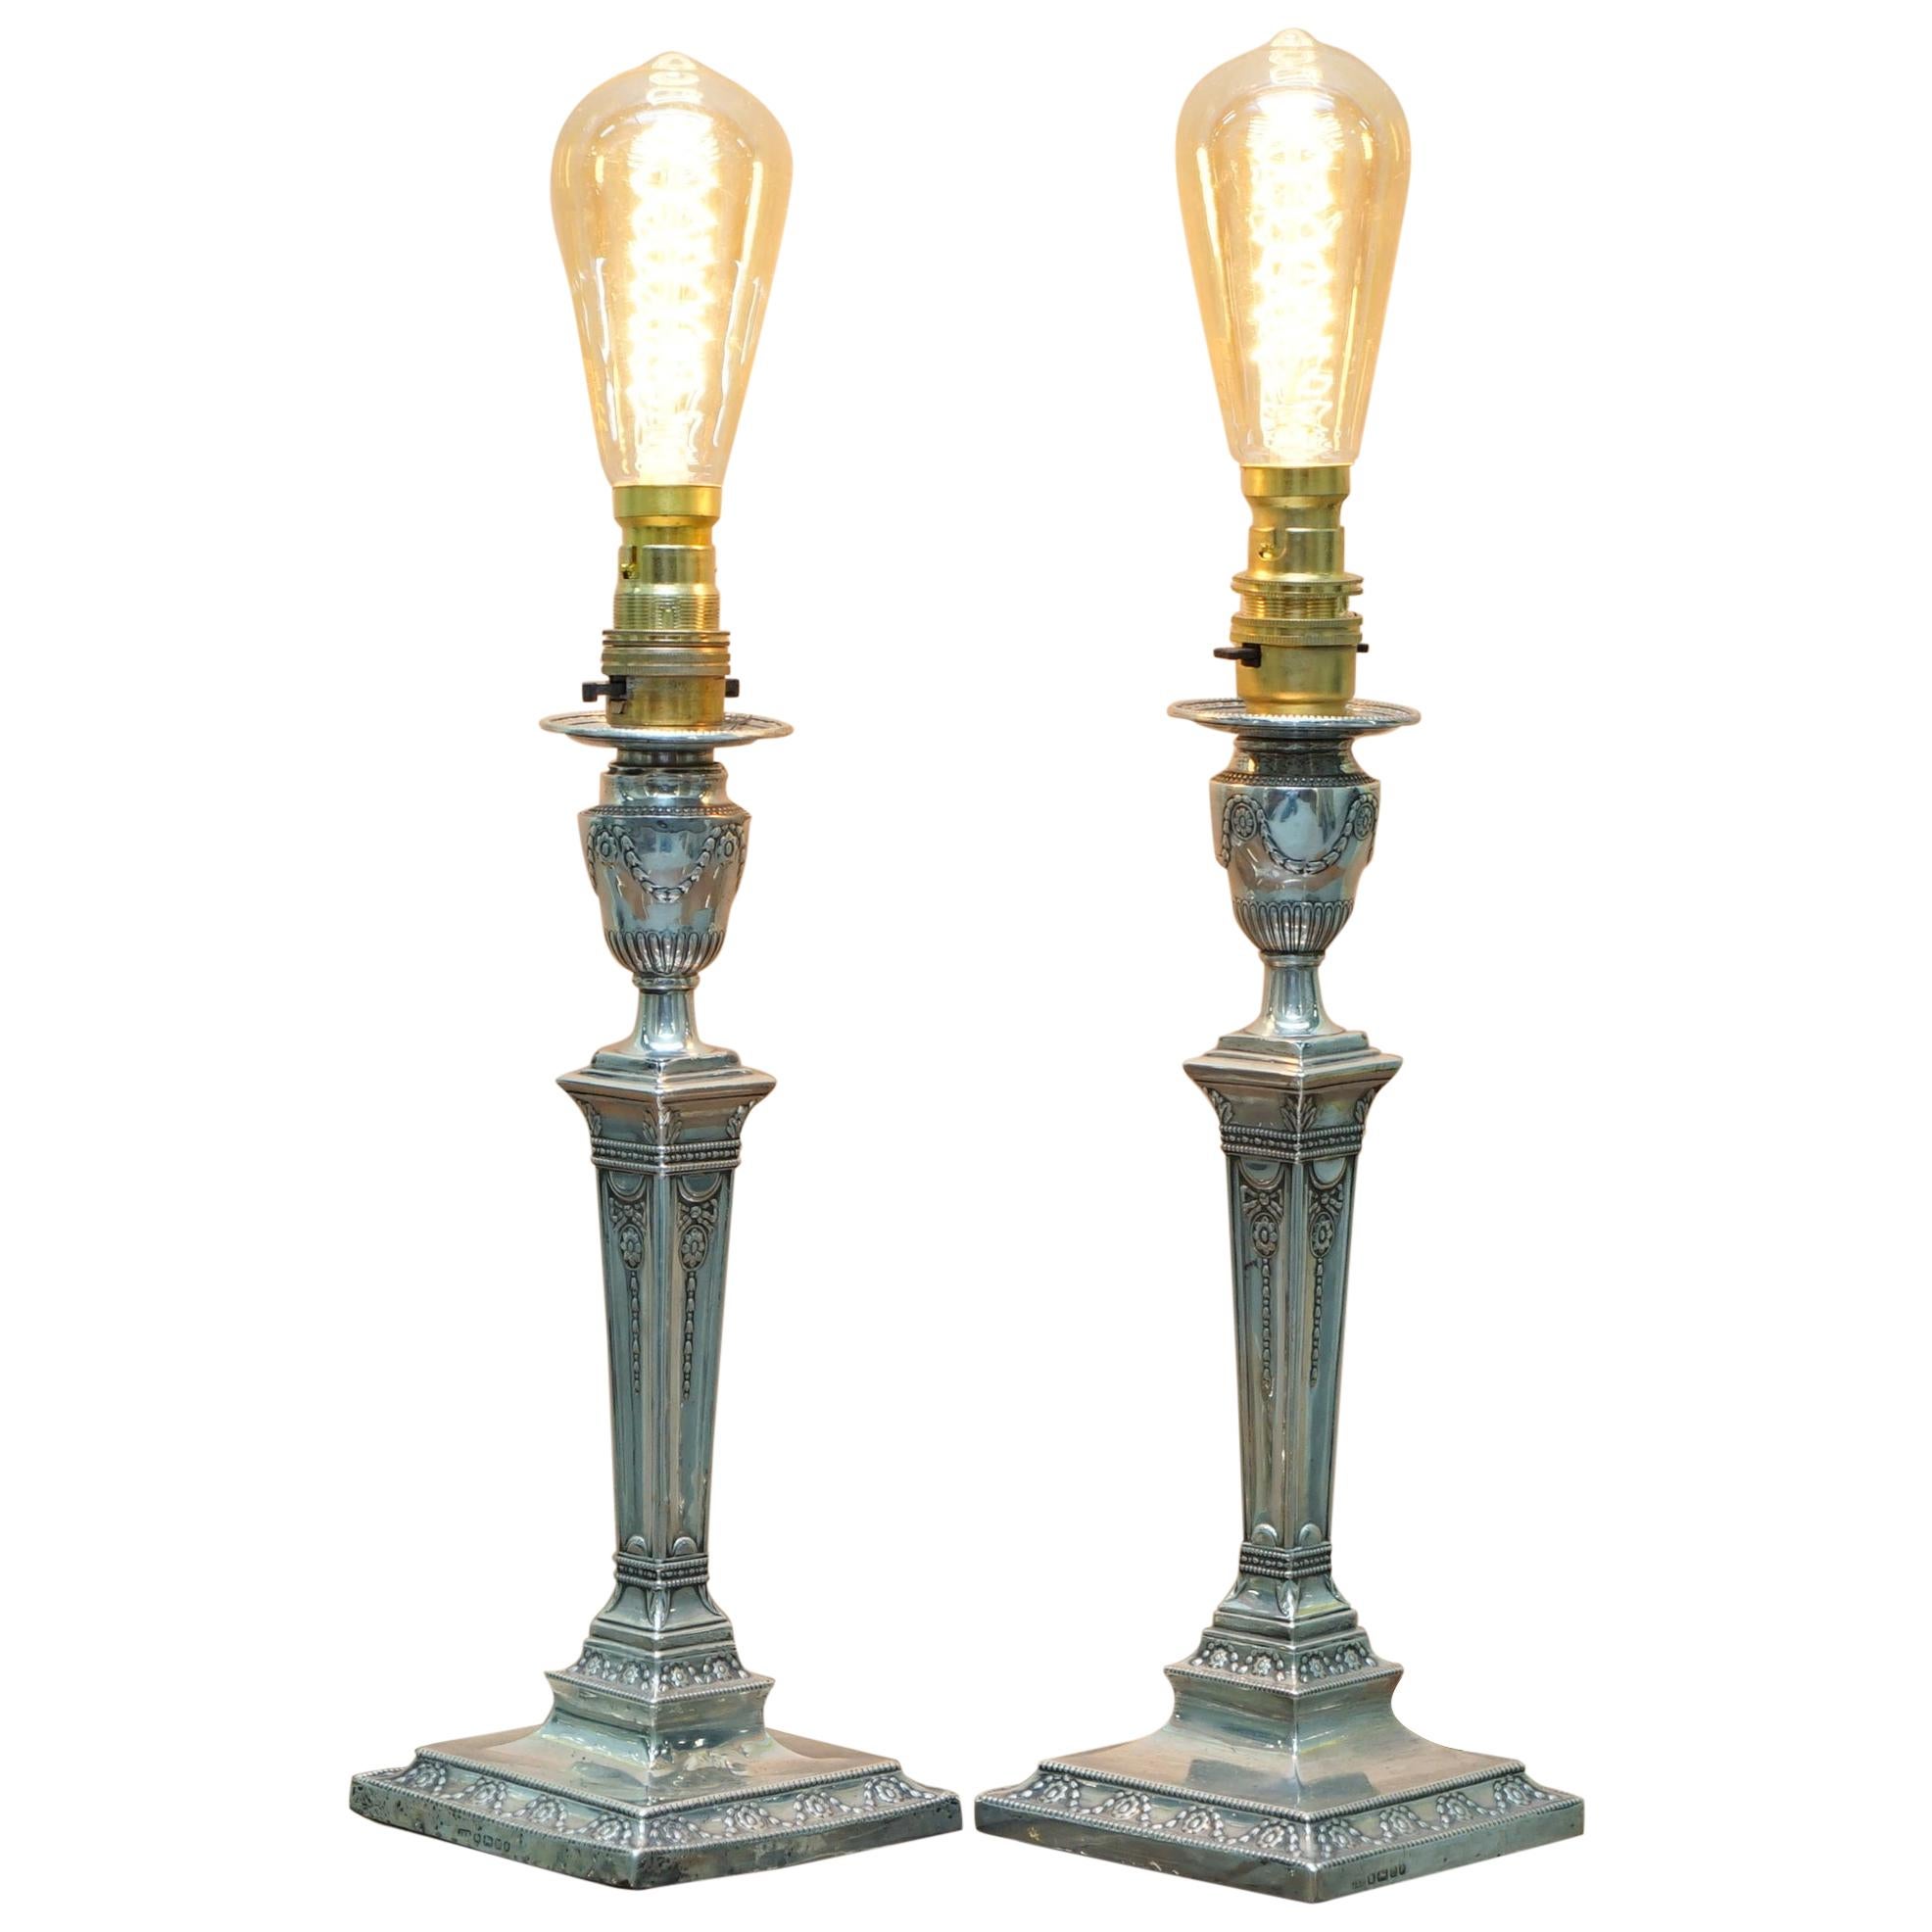 Rare Pair of 1879 James Bembridge Sterling Silver Corinthian Candlestick Lamps For Sale